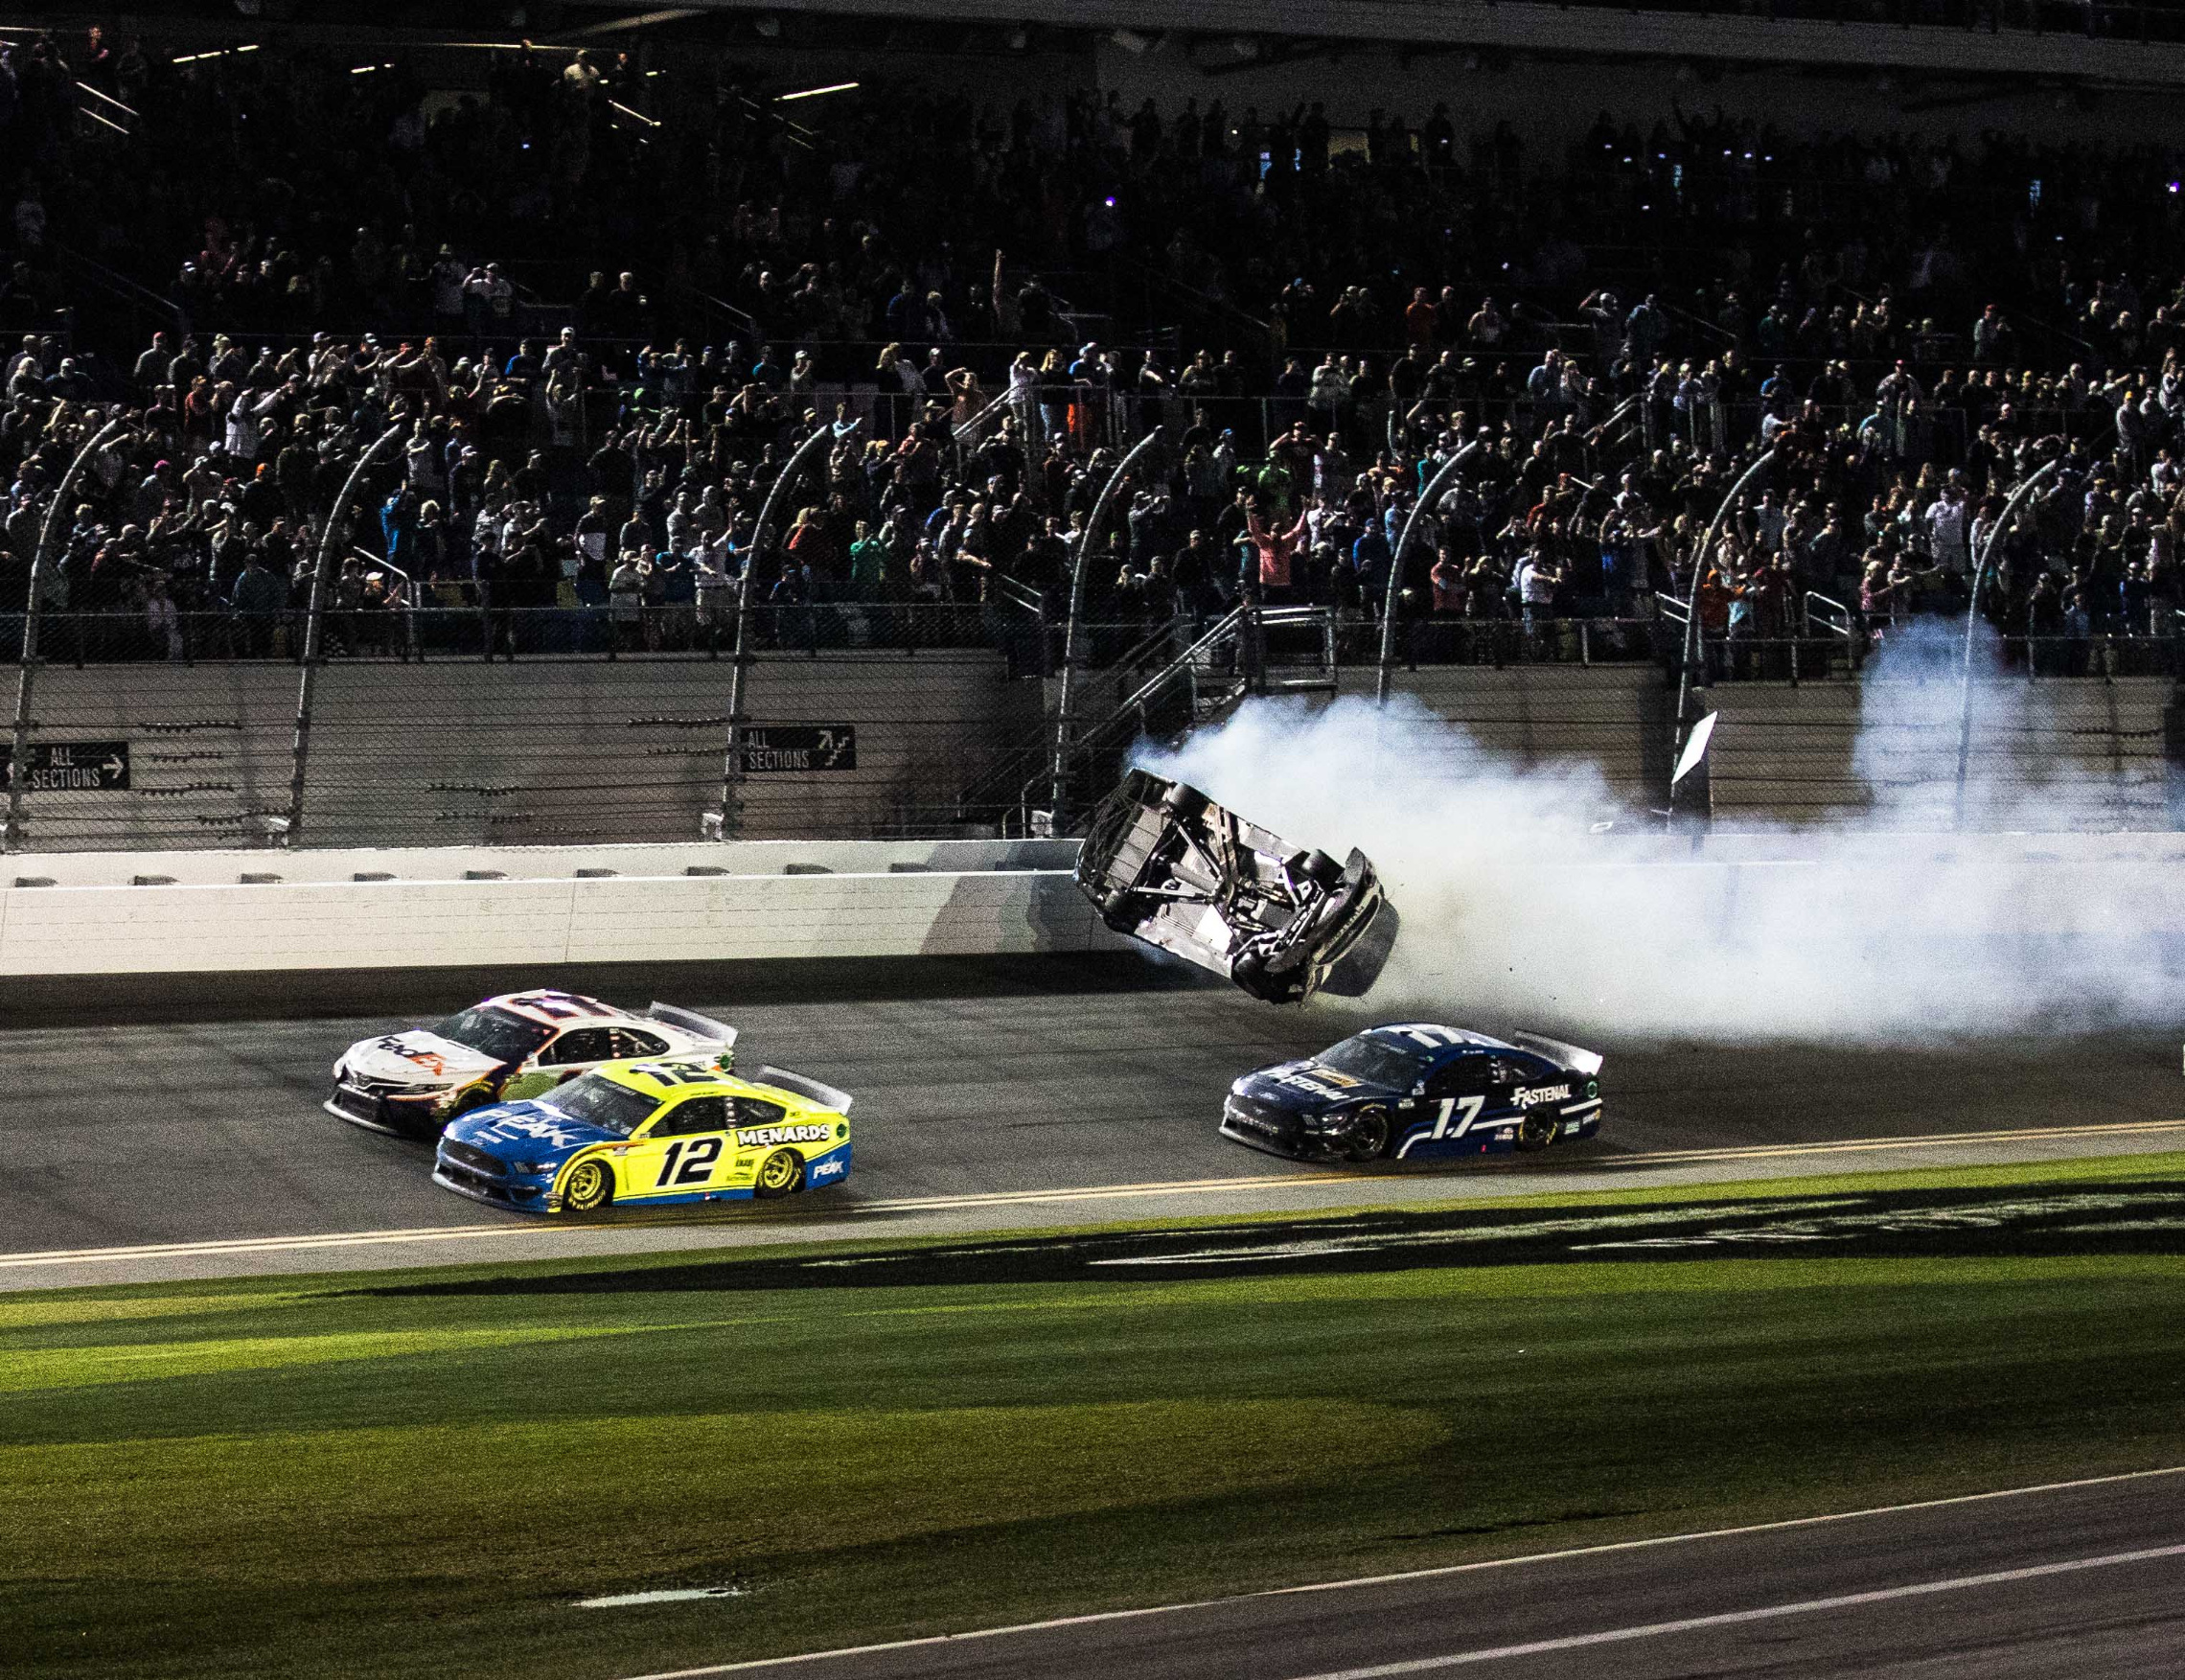 Ryan Newman's car flips as Denny Hamlin (110 and Ryan Blaney (12) battle to the finish line at the conclusion of the 62nd Daytona 500,  on Monday, February 17, 2020 in Daytona, Florida. Photo by /UPI, Image: 499189293, License: Rights-managed, Restrictions: , Model Release: no, Credit line: EDWIN LOCKE / UPI / Profimedia